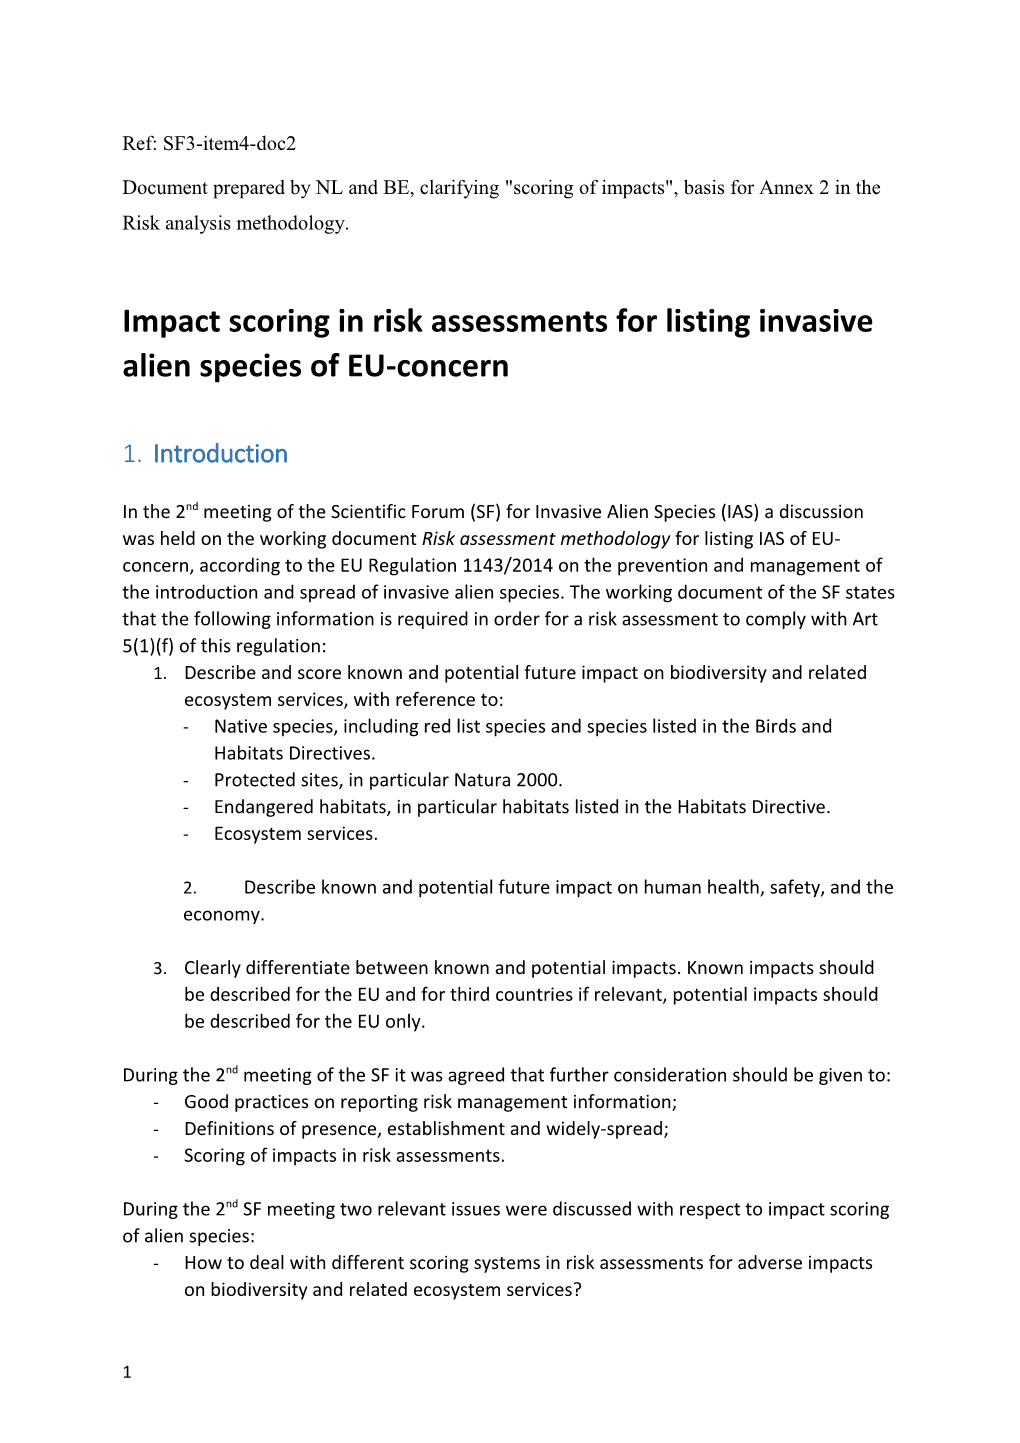 Impact Scoring in Risk Assessments for Listing Invasive Alien Species of EU-Concern